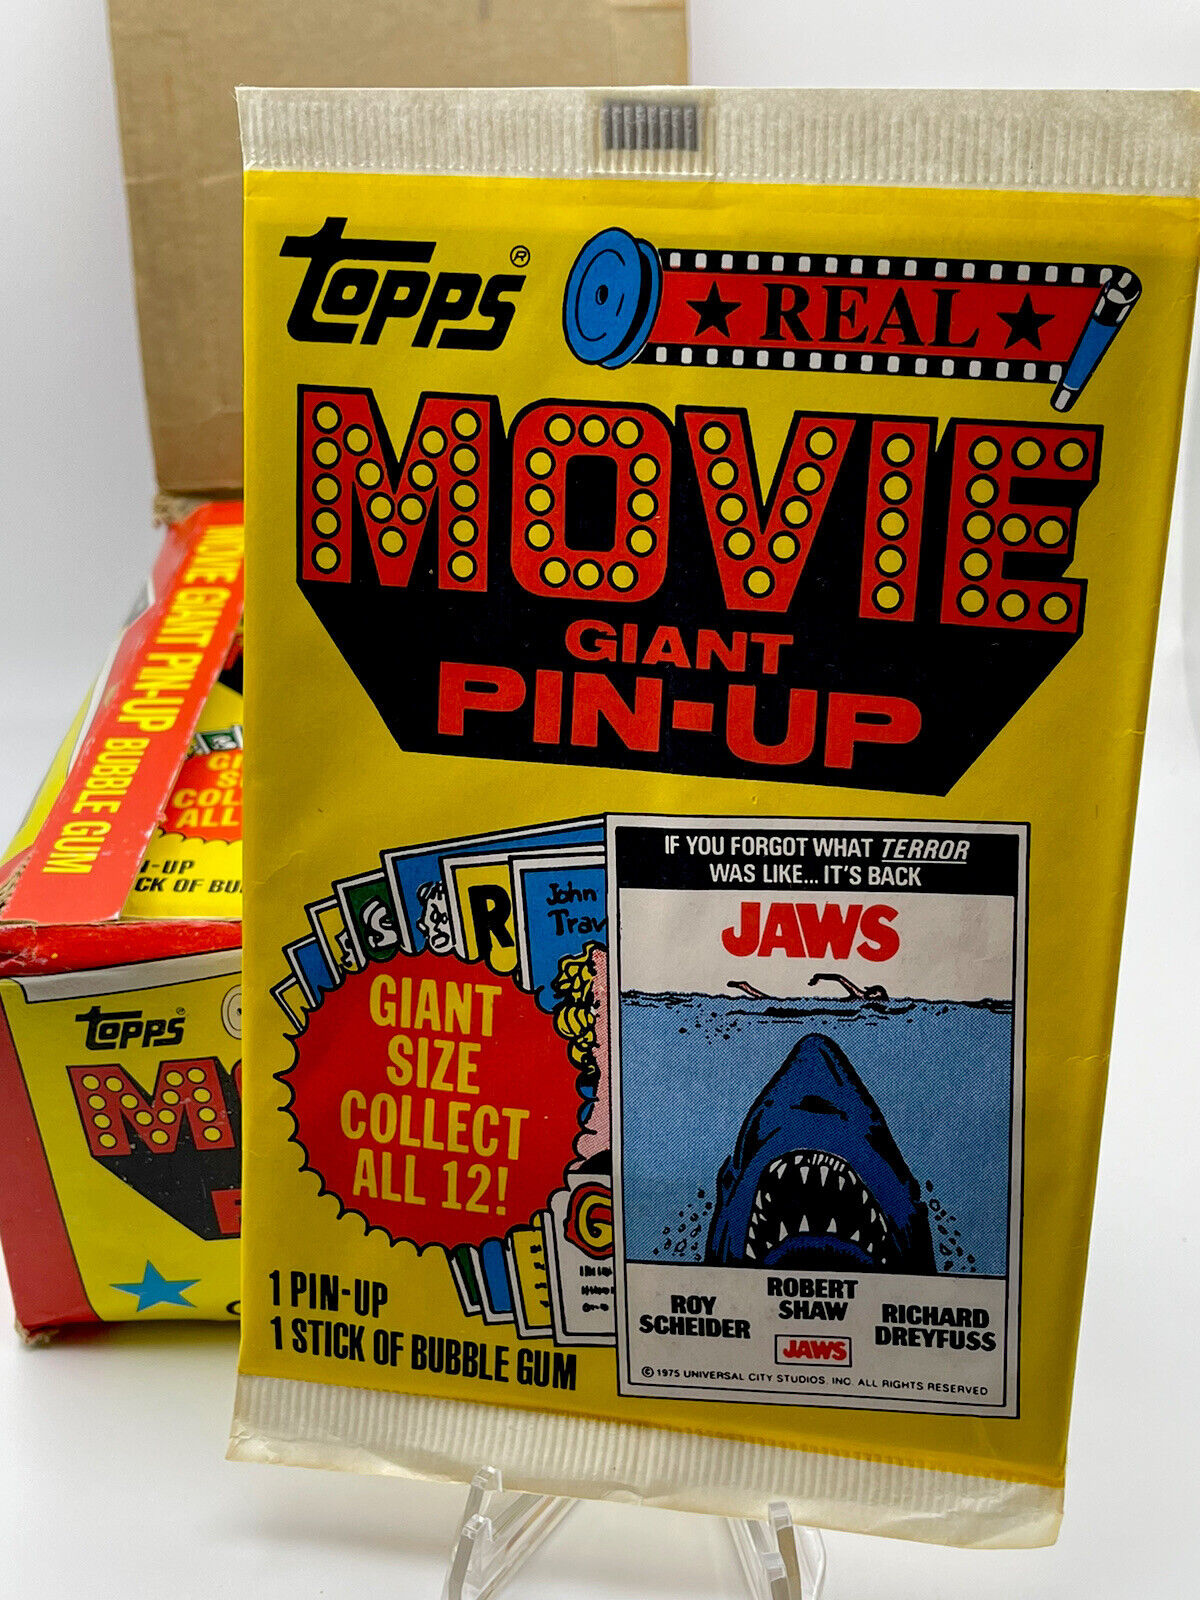 Topps 1981 Real Movie Giant Pin-Up (1) Unopened factory sealed pack. 12”x20”